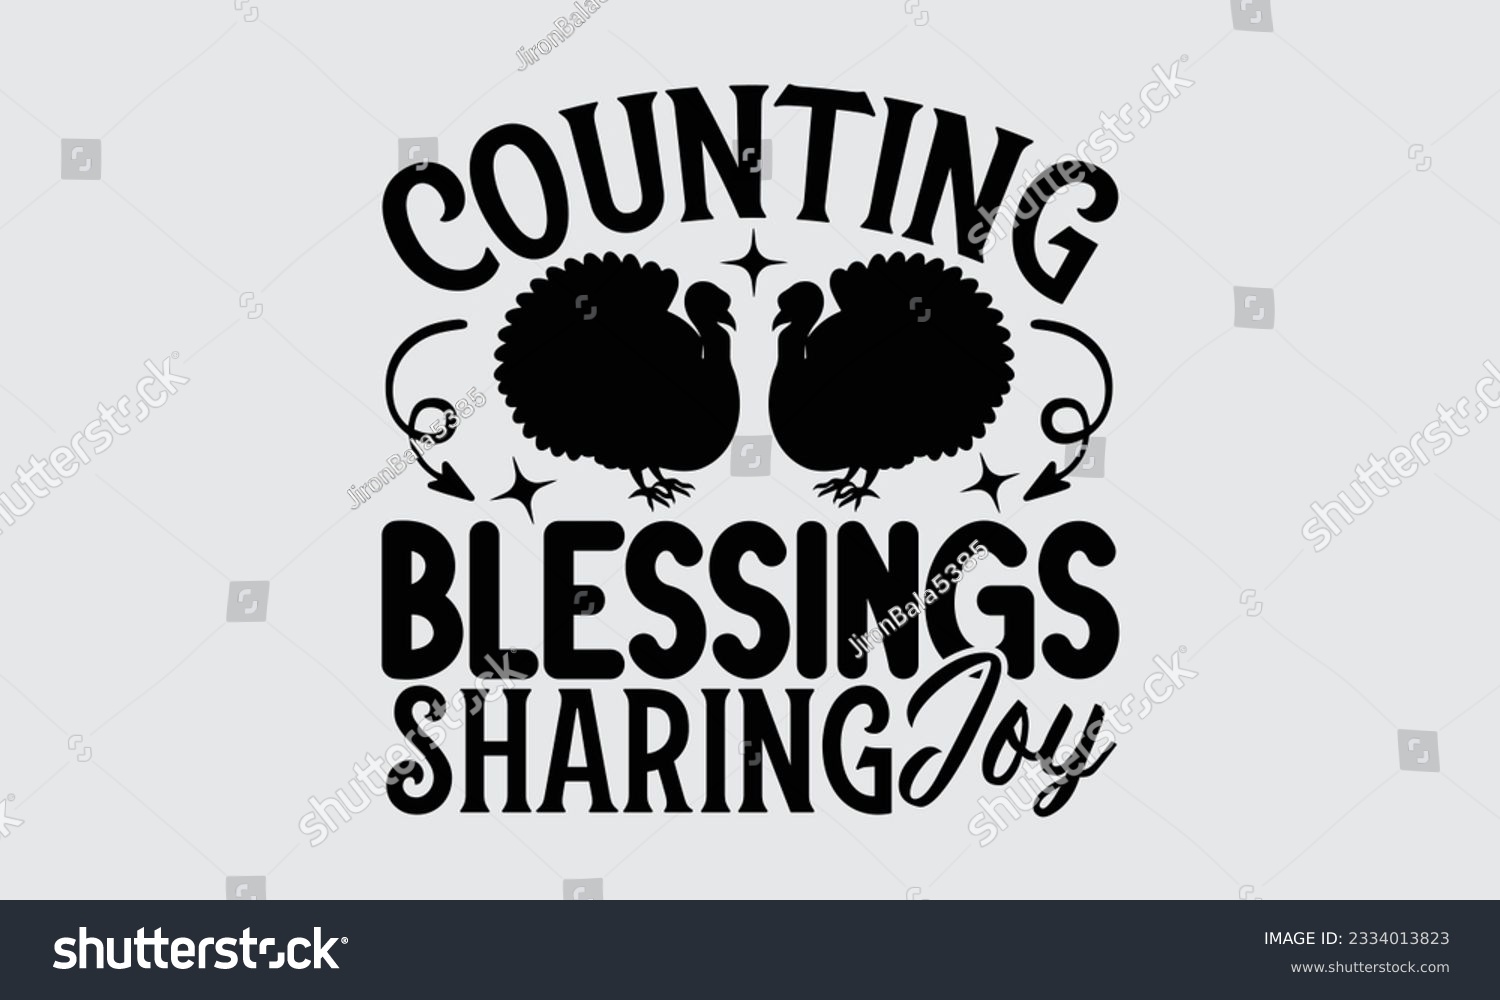 SVG of Counting Blessings Sharing Joy - Thanksgiving T-Shirt Design, Motivational Inspirational SVG Quotes, Hand Drawn Vintage Illustration With Hand-Lettering And Decoration Elements. svg